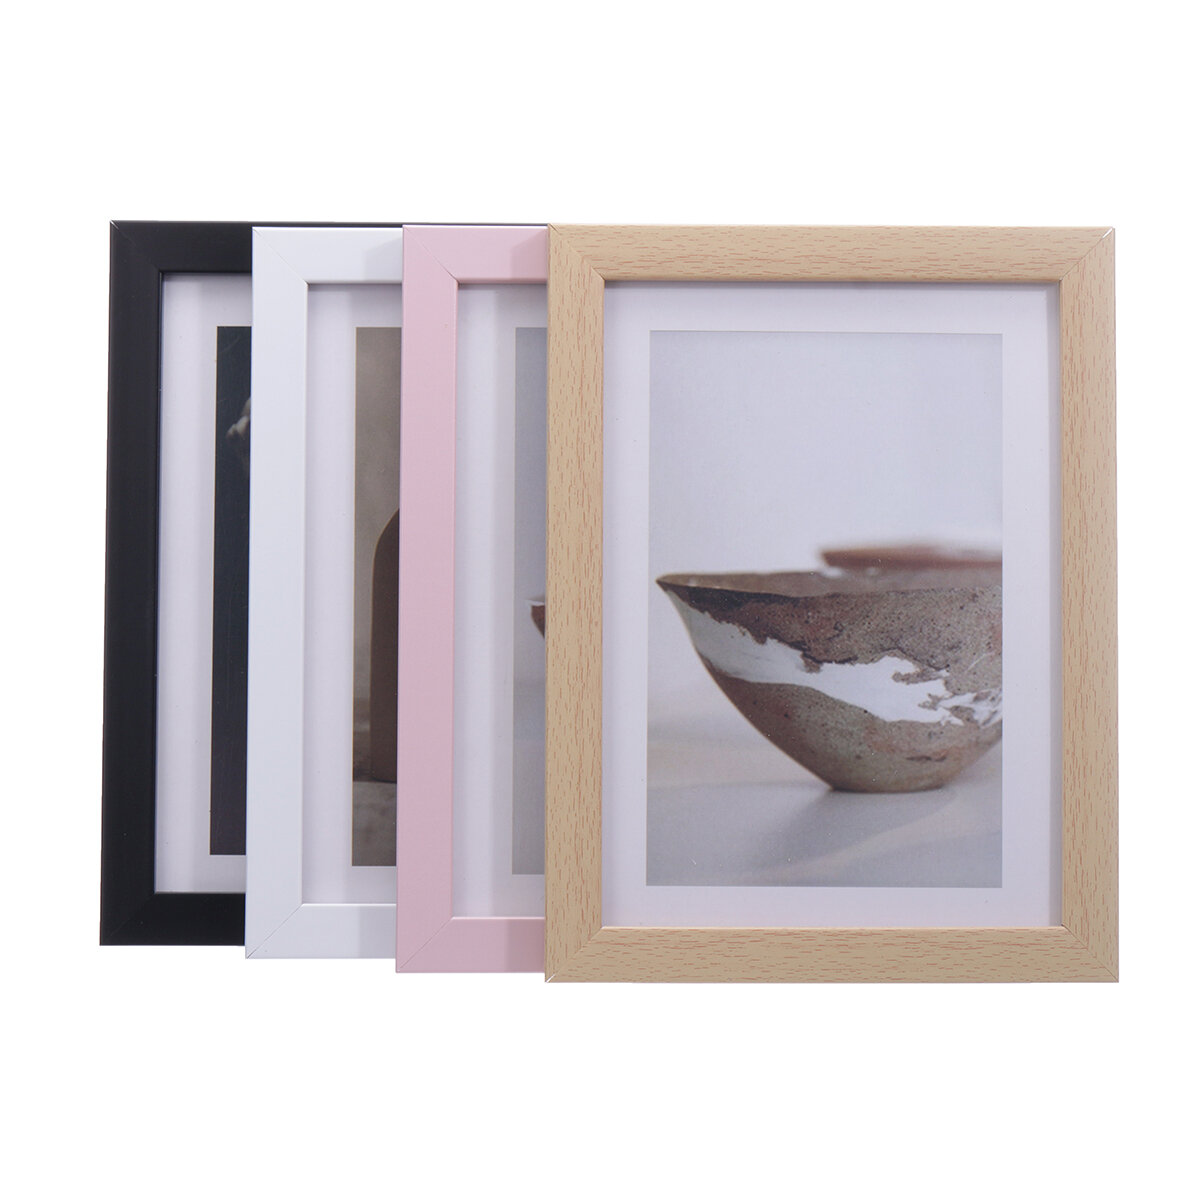 11Pcs/Set Modern Wall Hanging Photo Frame Set Art Home Decor Family Picture Display Living Room Hall